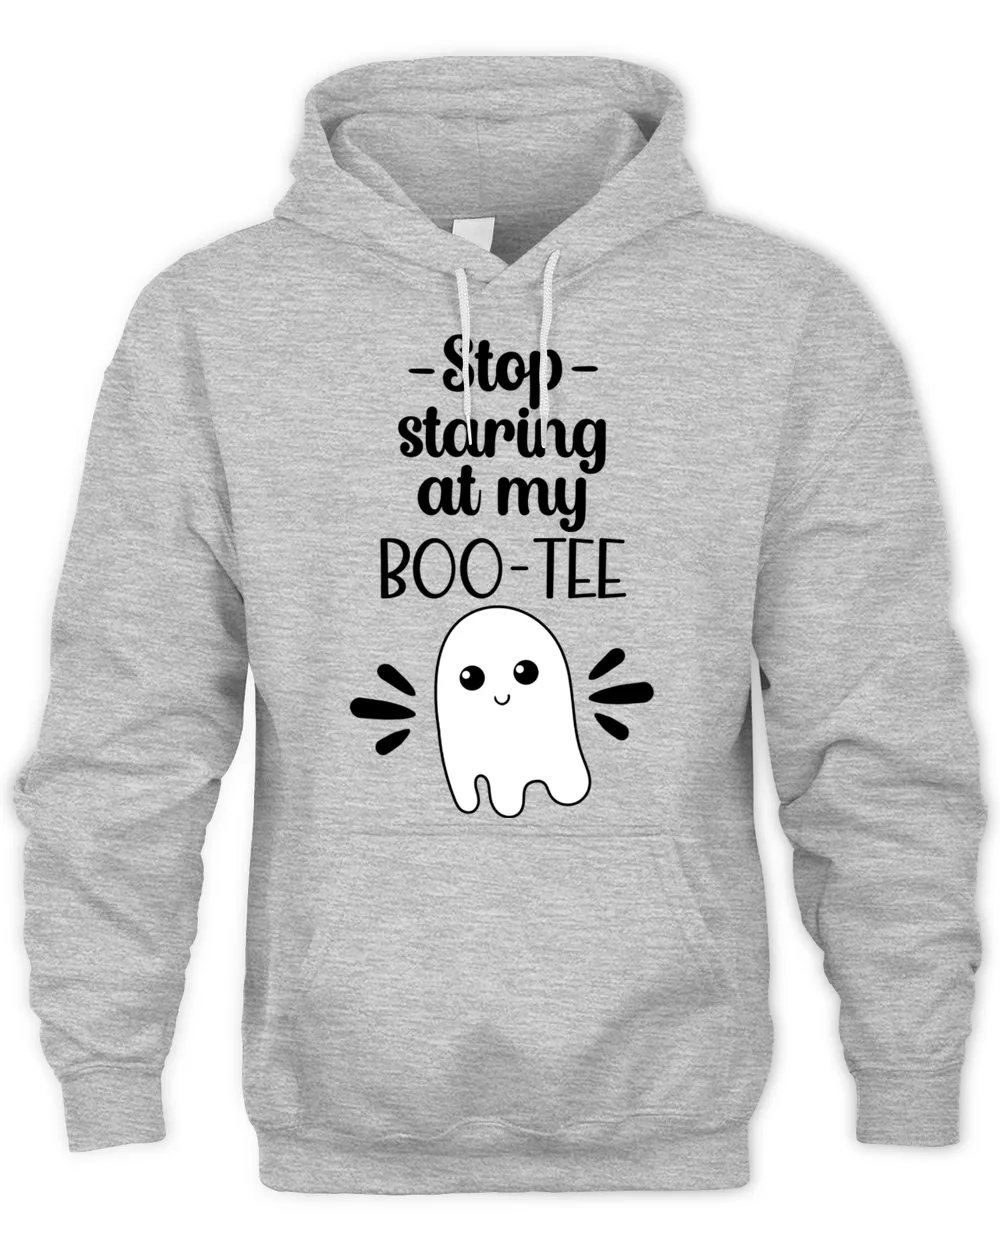 Stop staring at my Bootee t shirt hoodie sweater